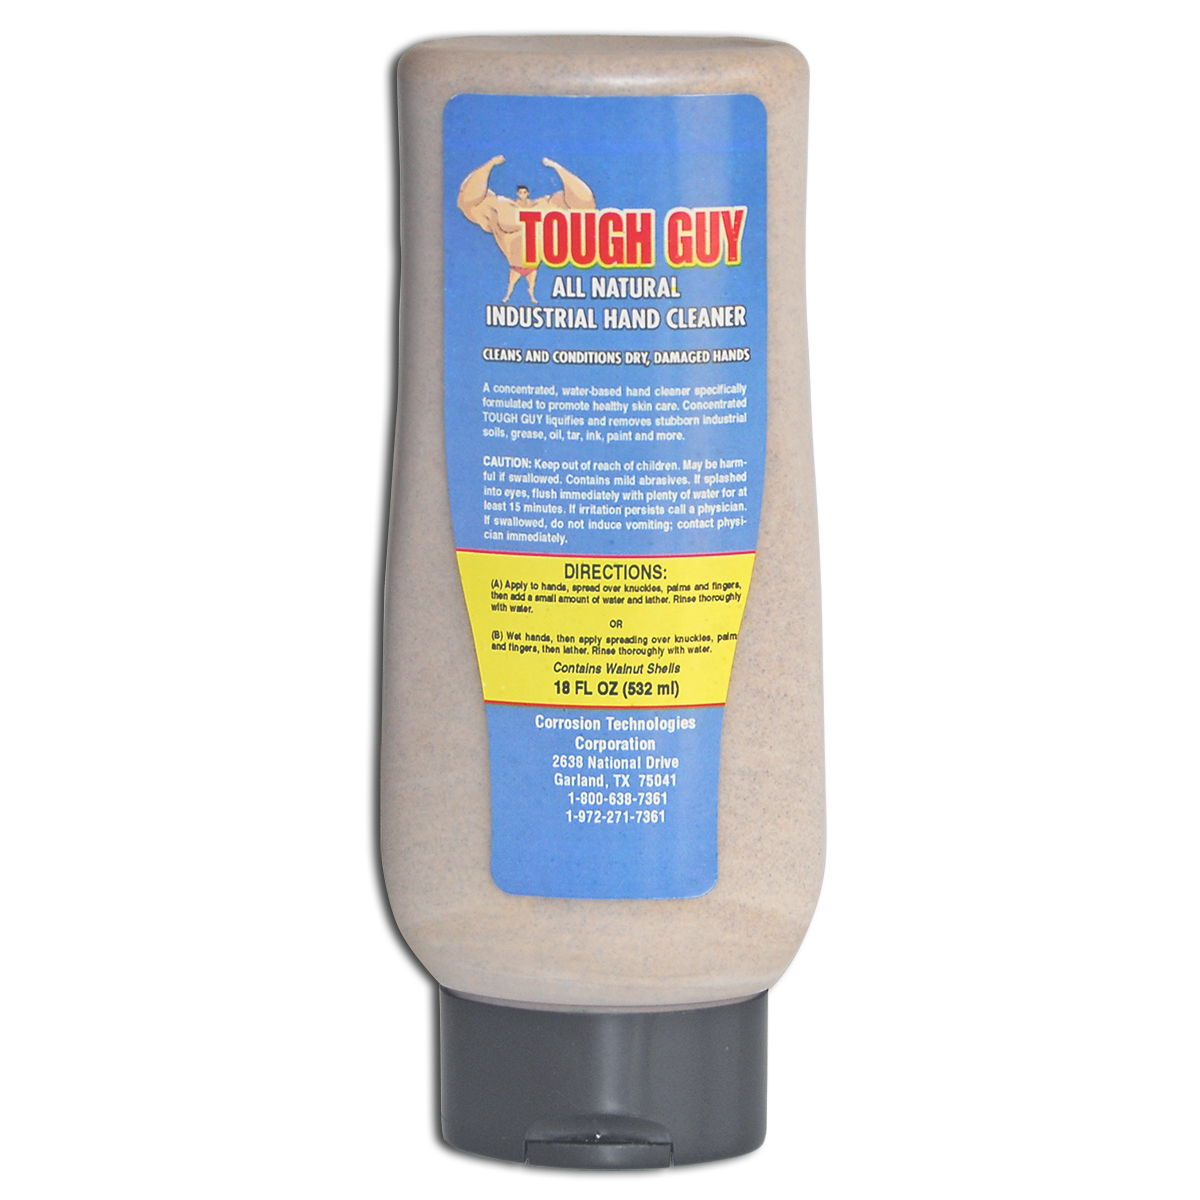 Tough Guy hand cleaner